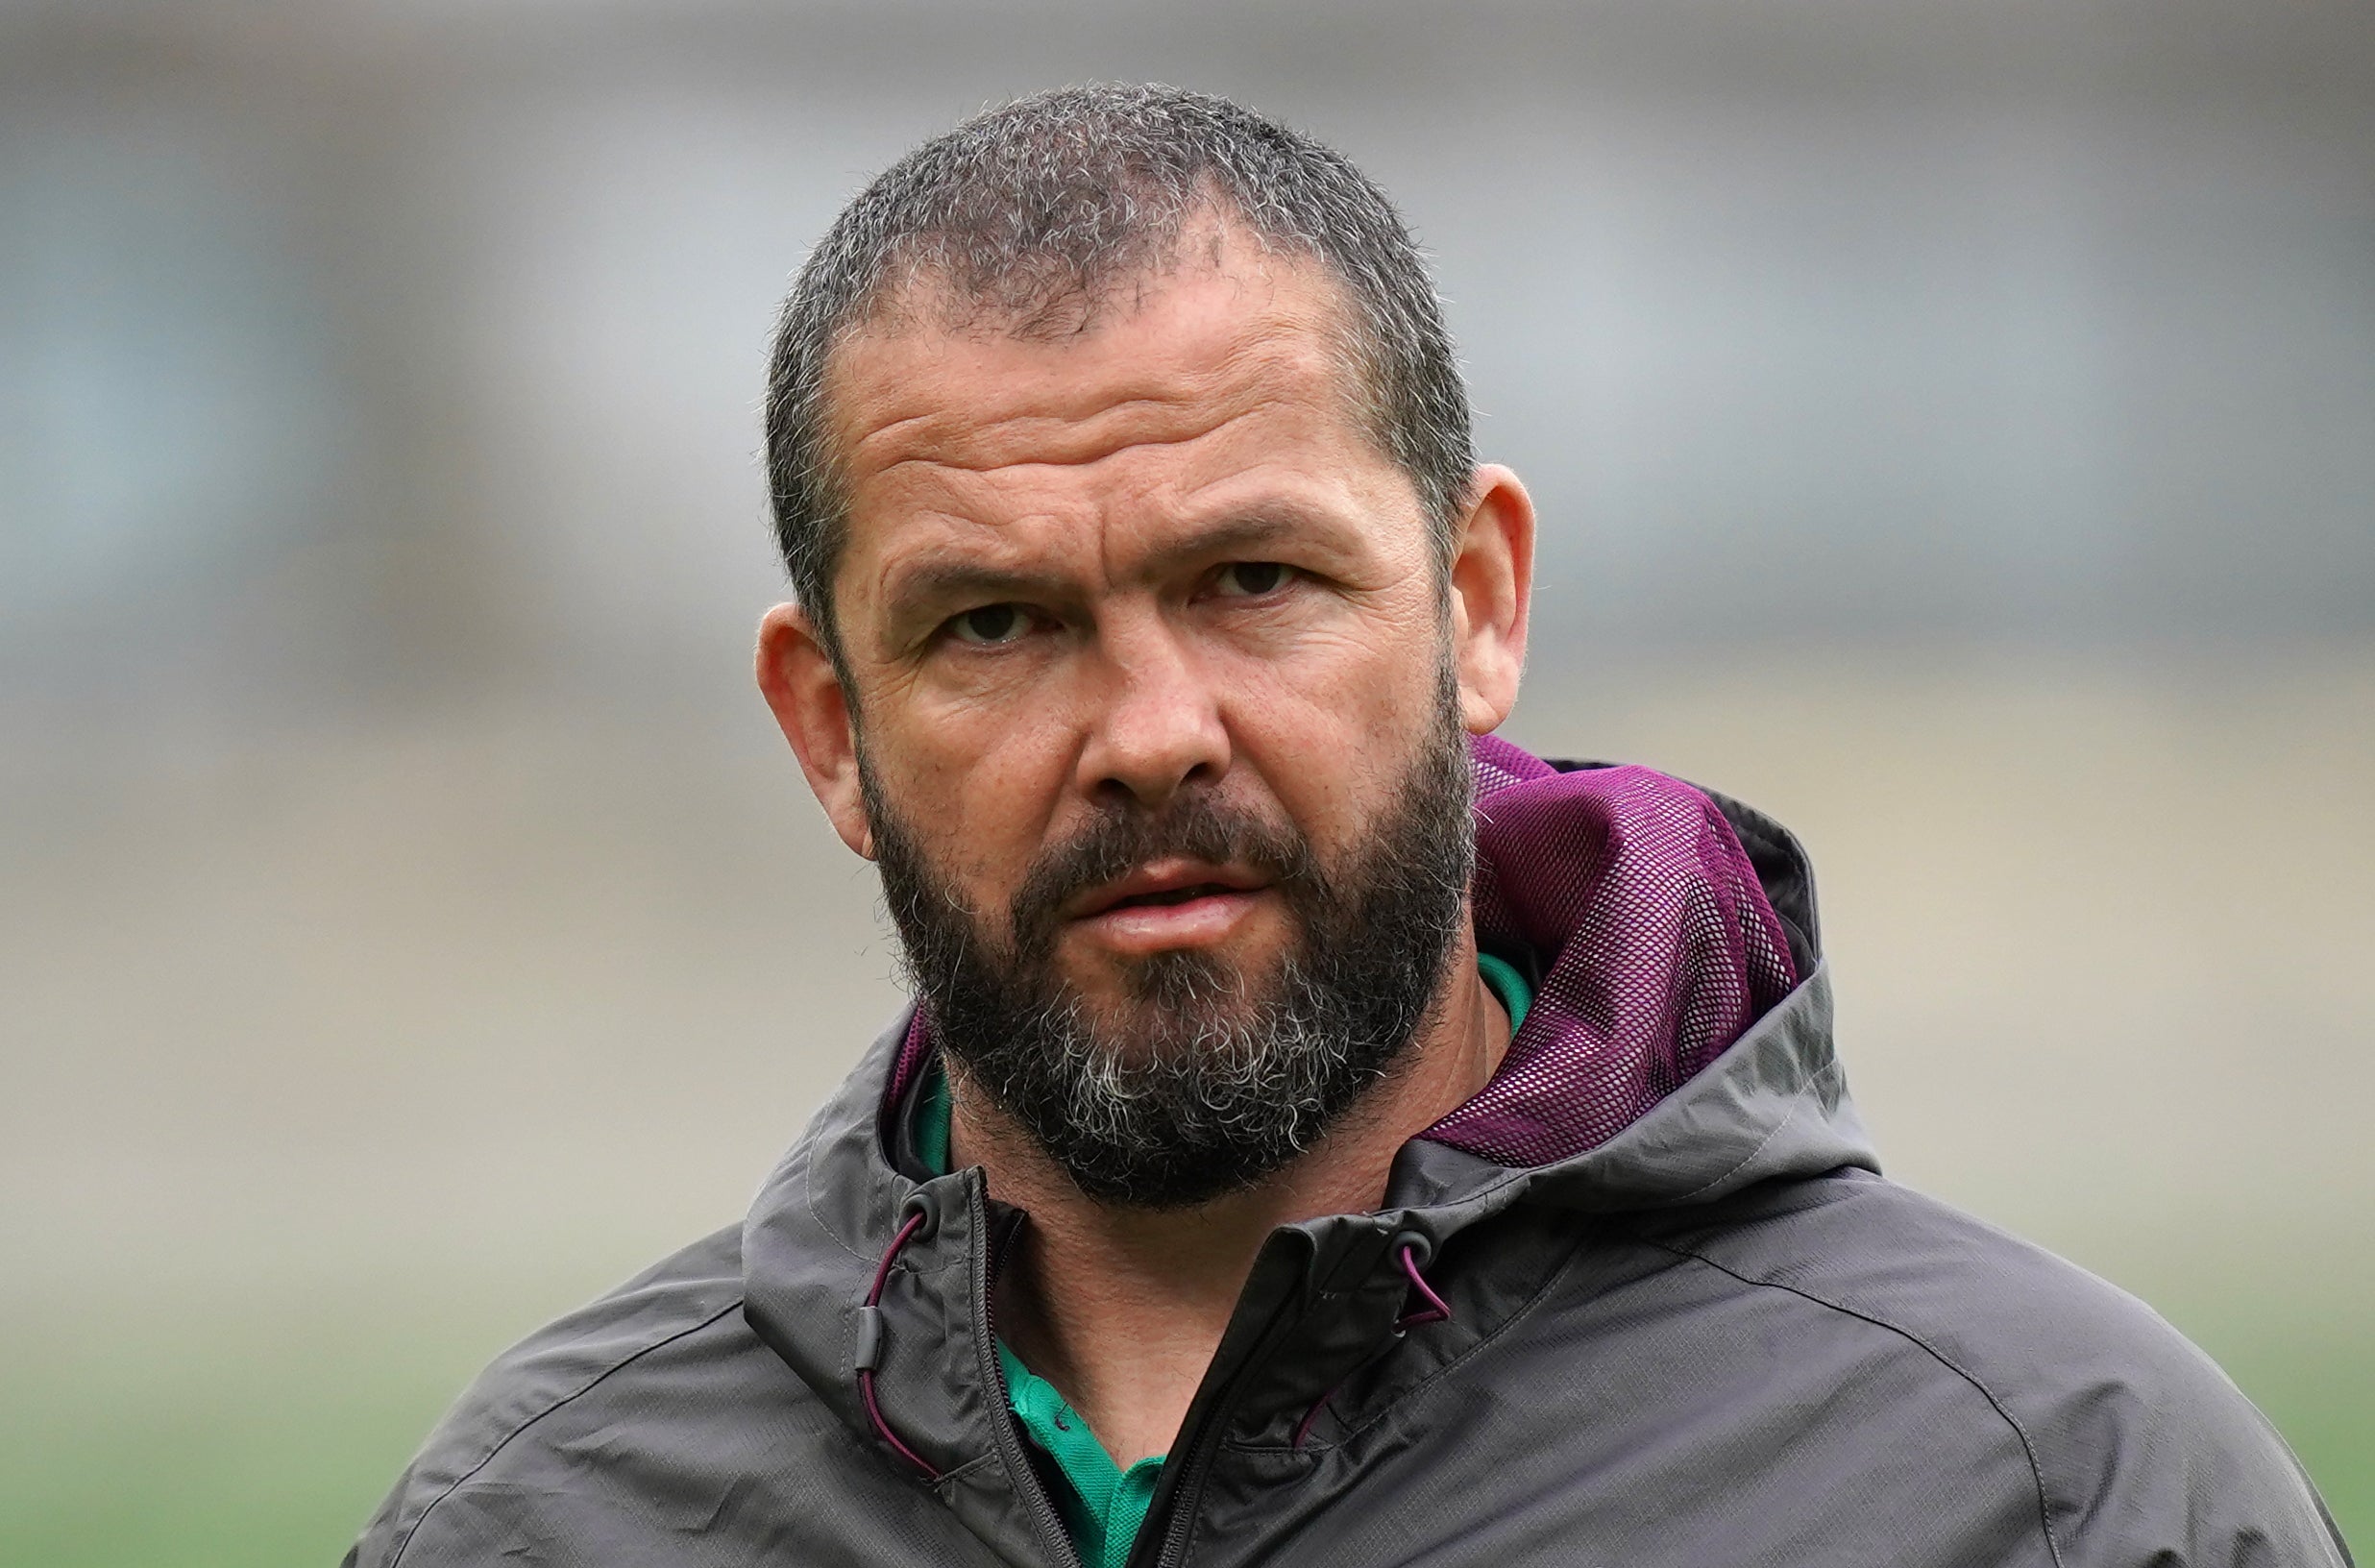 Ireland boss Andy Farrell, pictured, has selected Johnny Sexton to start at fly-half (Niall Carson/PA)